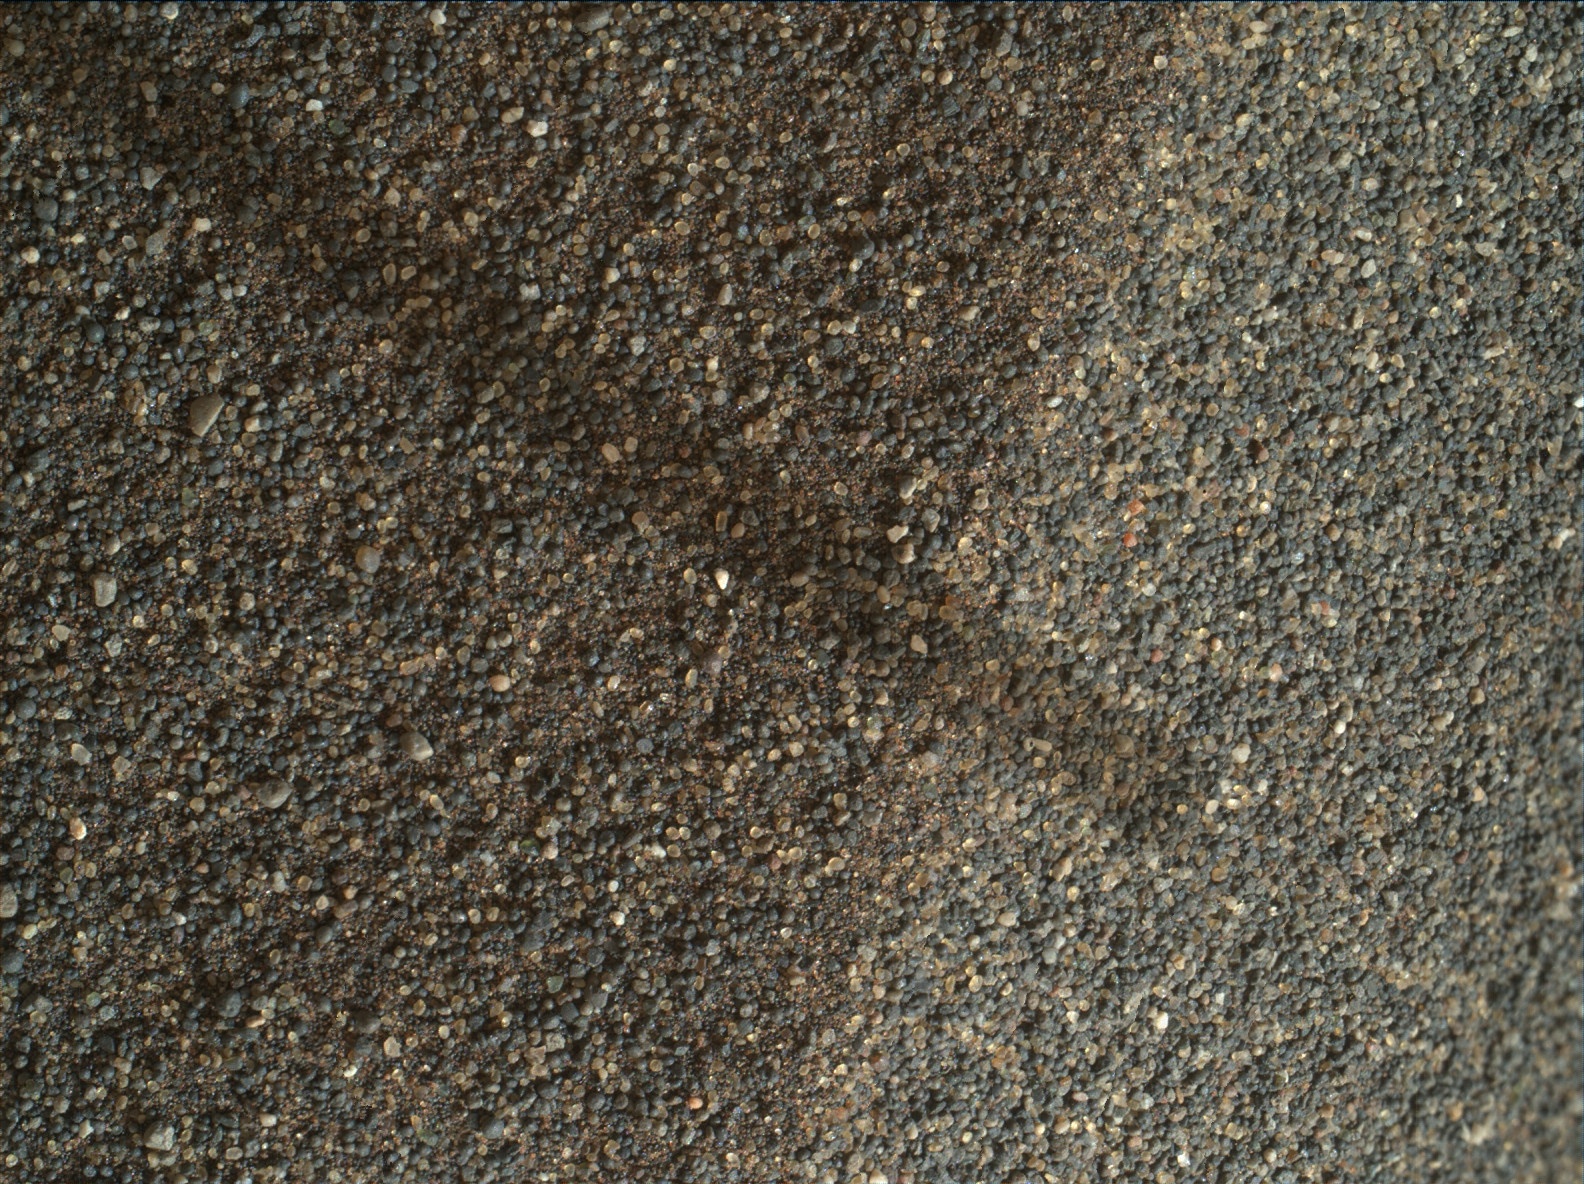 Nasa's Mars rover Curiosity acquired this image using its Mars Hand Lens Imager (MAHLI) on Sol 1639